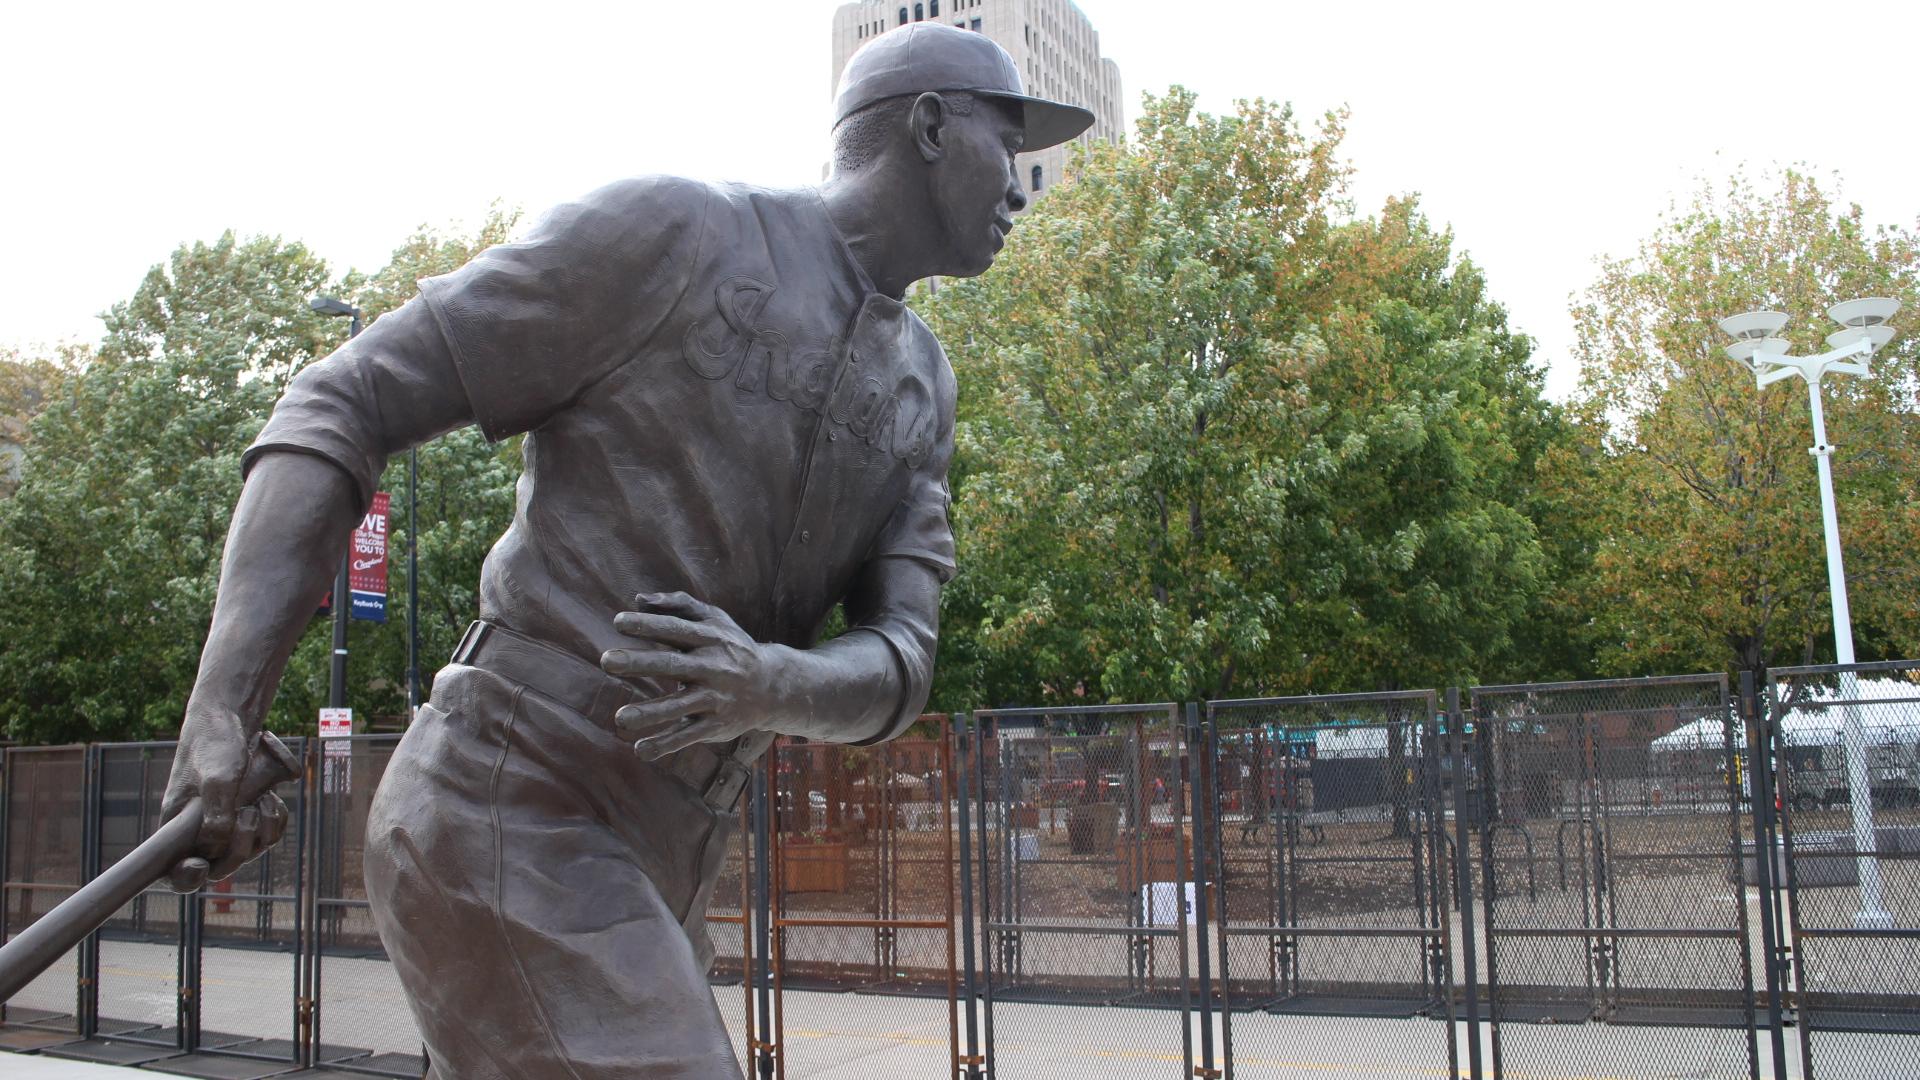 The Cleveland Indians' ballpark displays players' statues at the entrance. Pictured: Larry Doby, first African American in the American League.